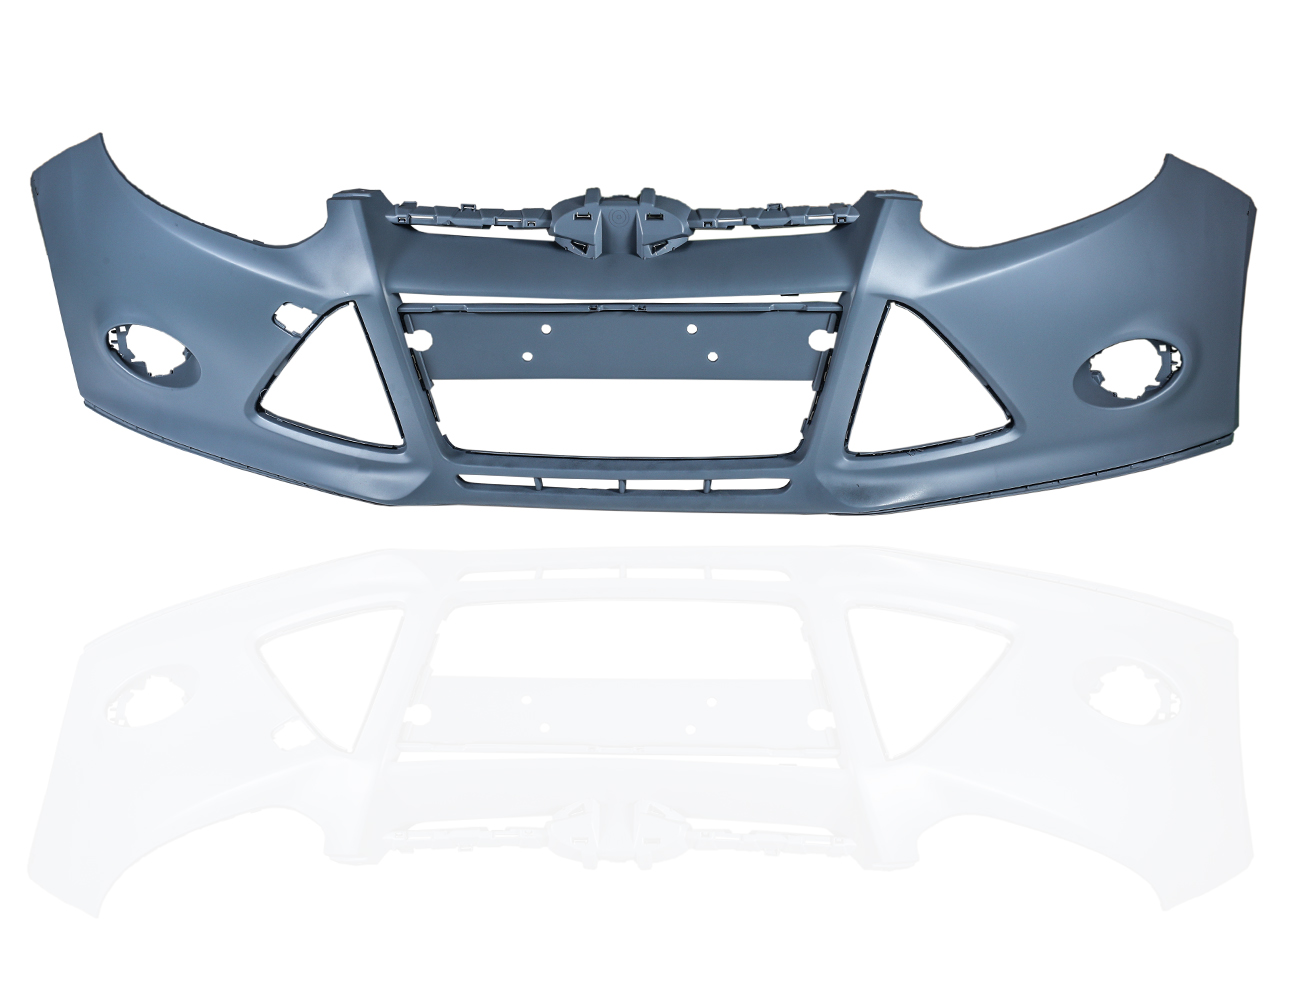 Used for American car focus 2012-2015 front bumper